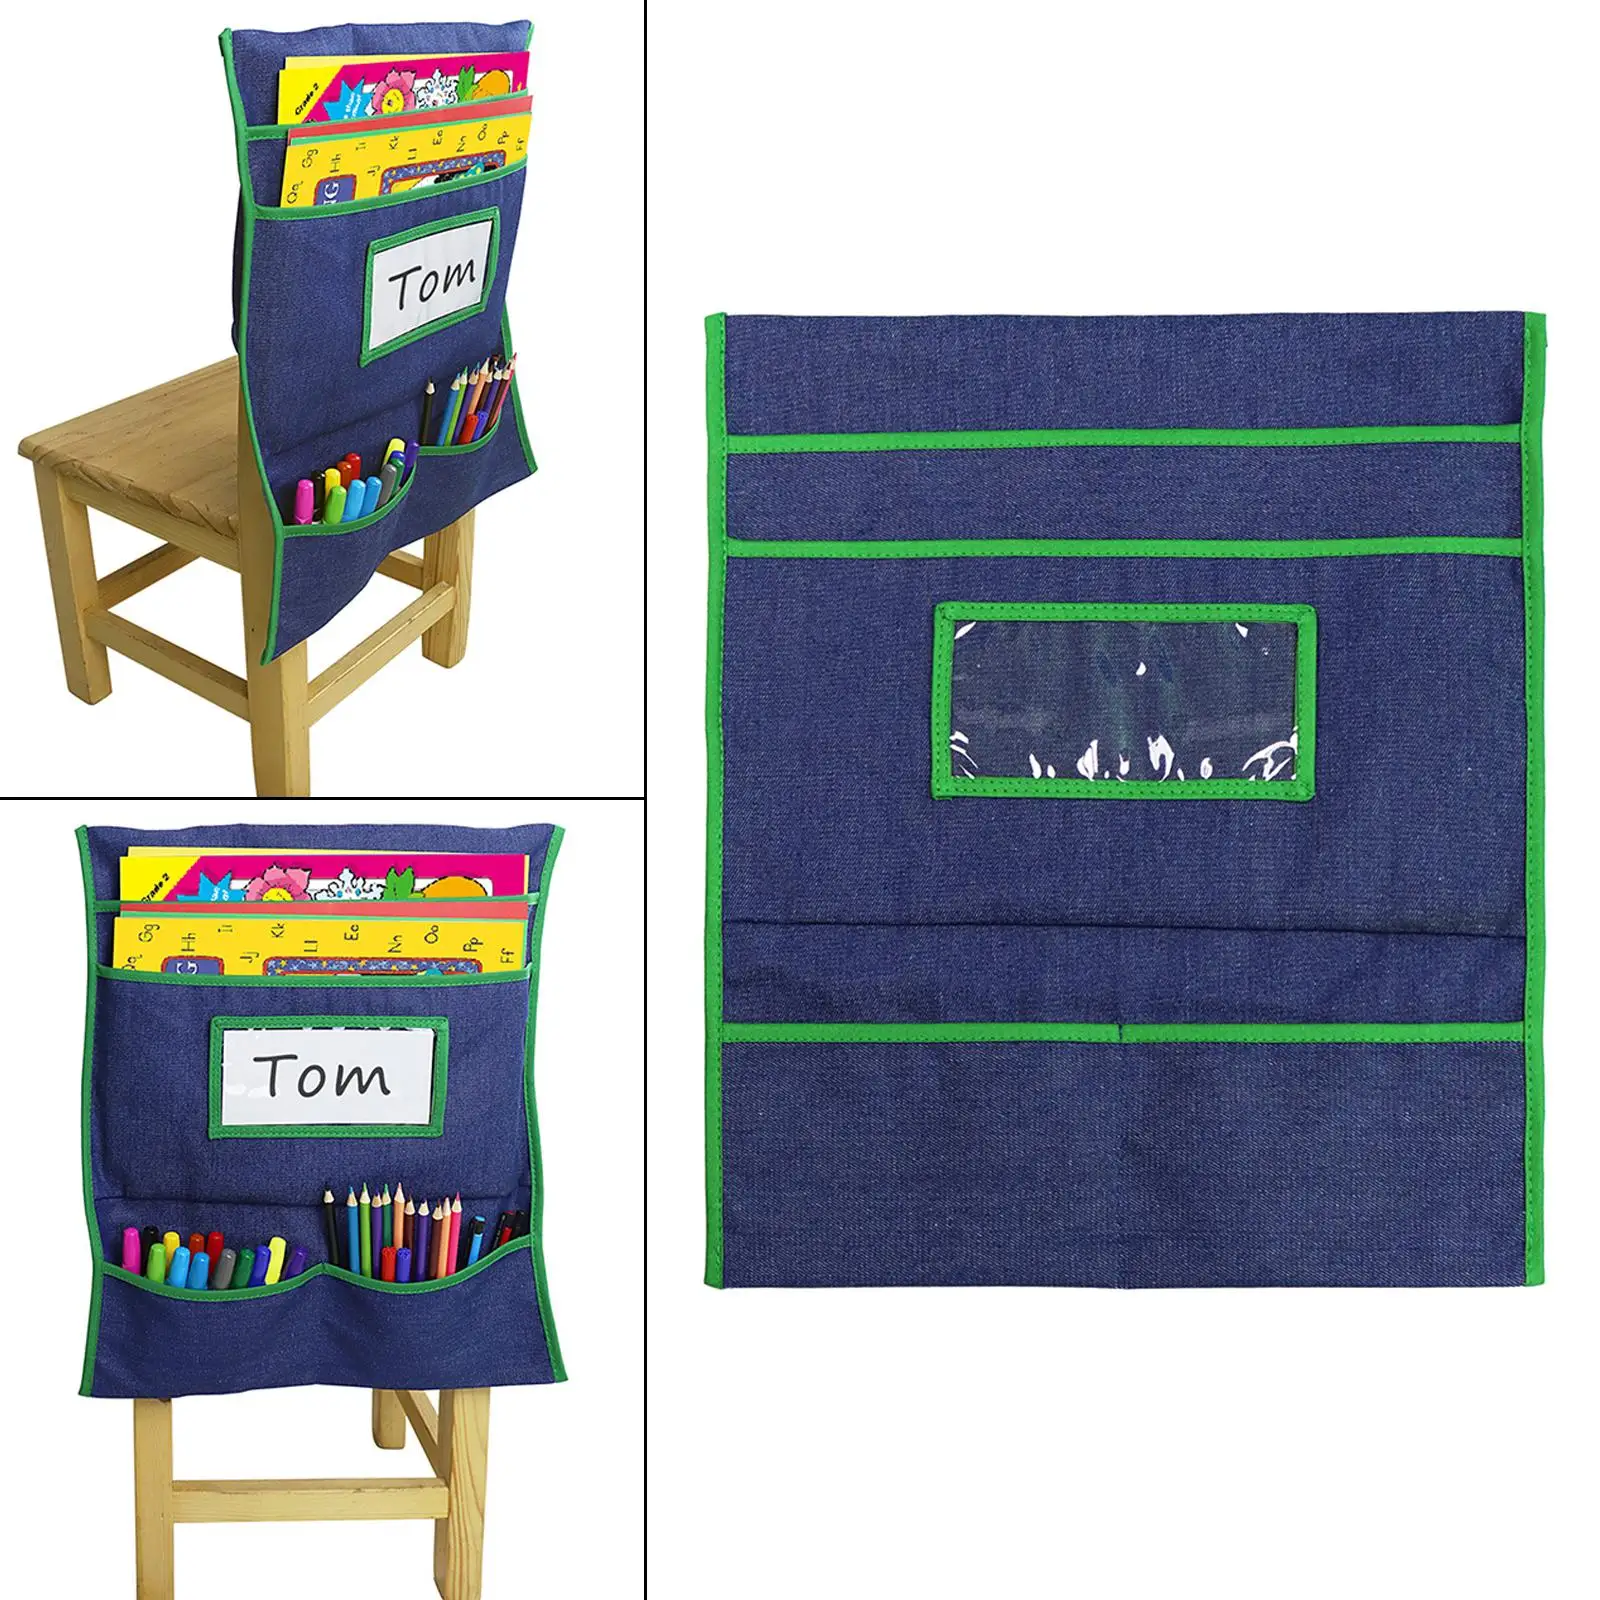 Chair Organizer Sturdy with Name Tag Slot Heavy Duty Perfect Fit Thoughtful Durable Chair chair Back Pocket for Storage Daycare